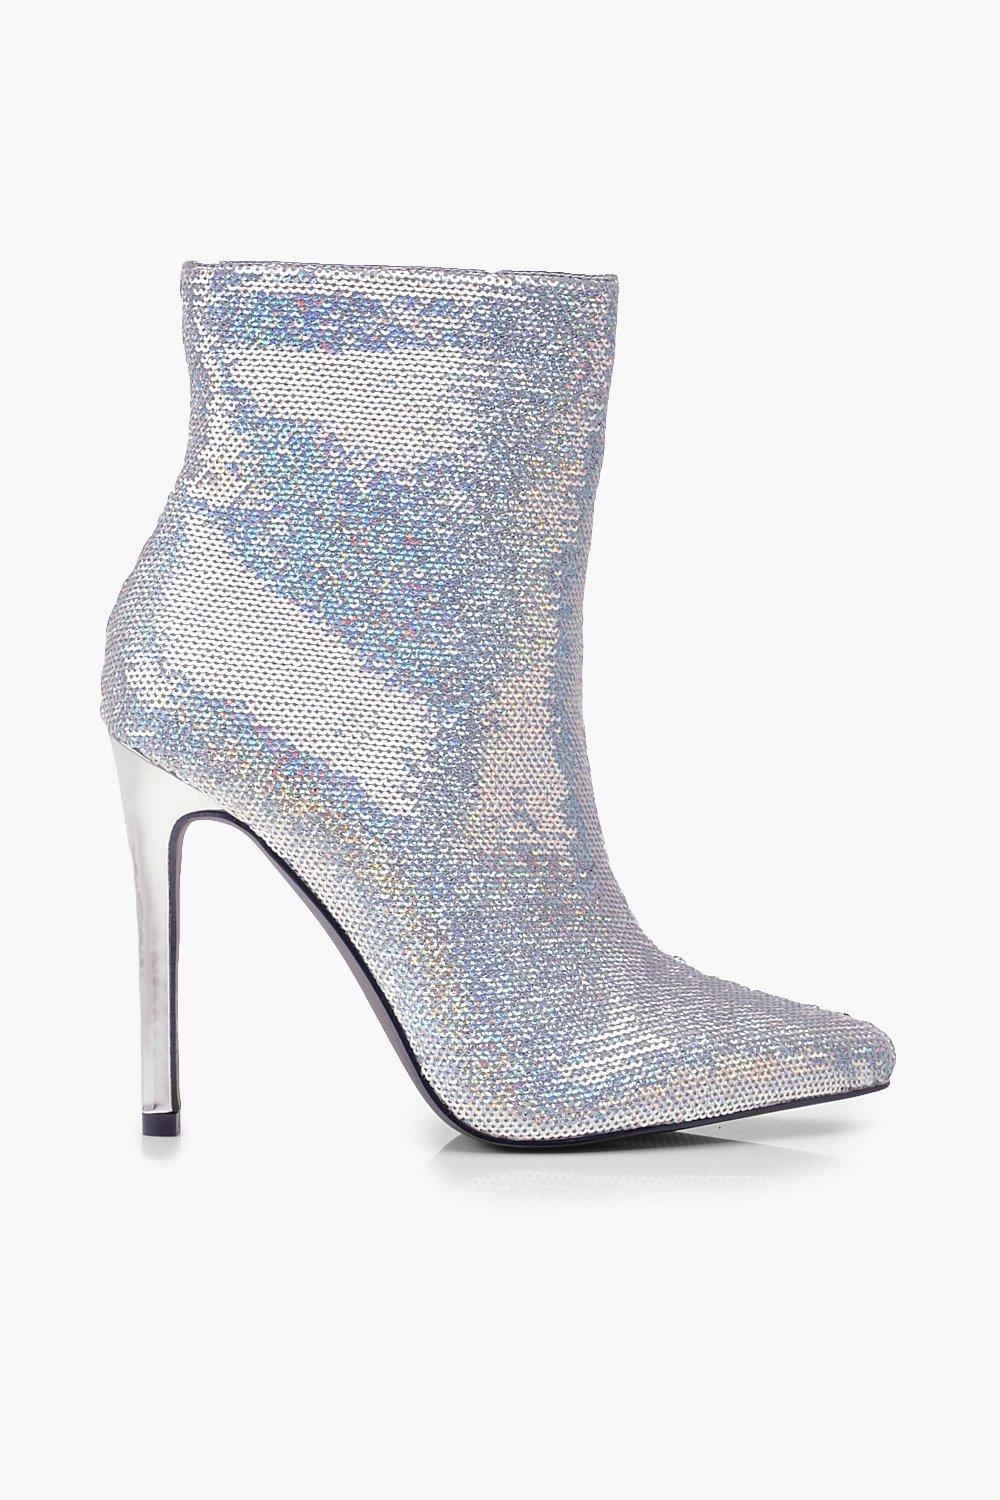 Sequin Pointed Shoe Boots | Boohoo UK